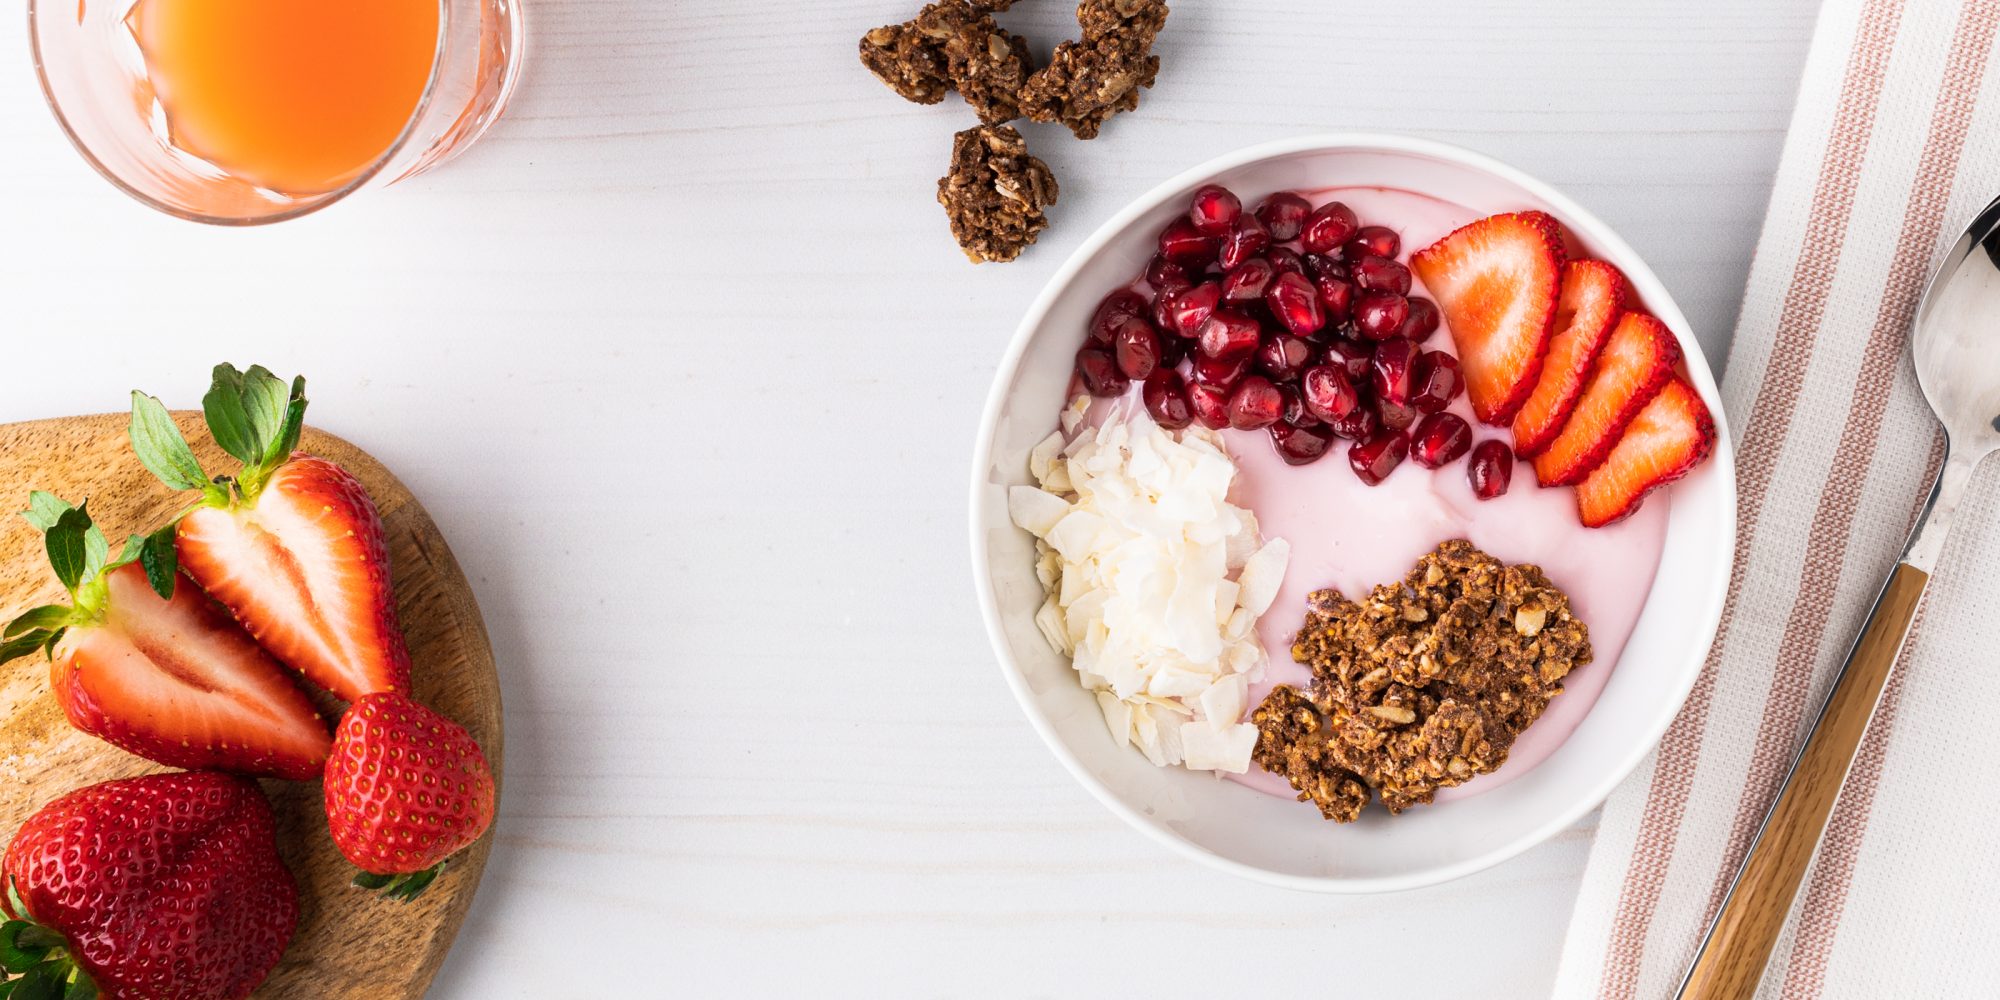 Heart Healthy Smoothie Bowl